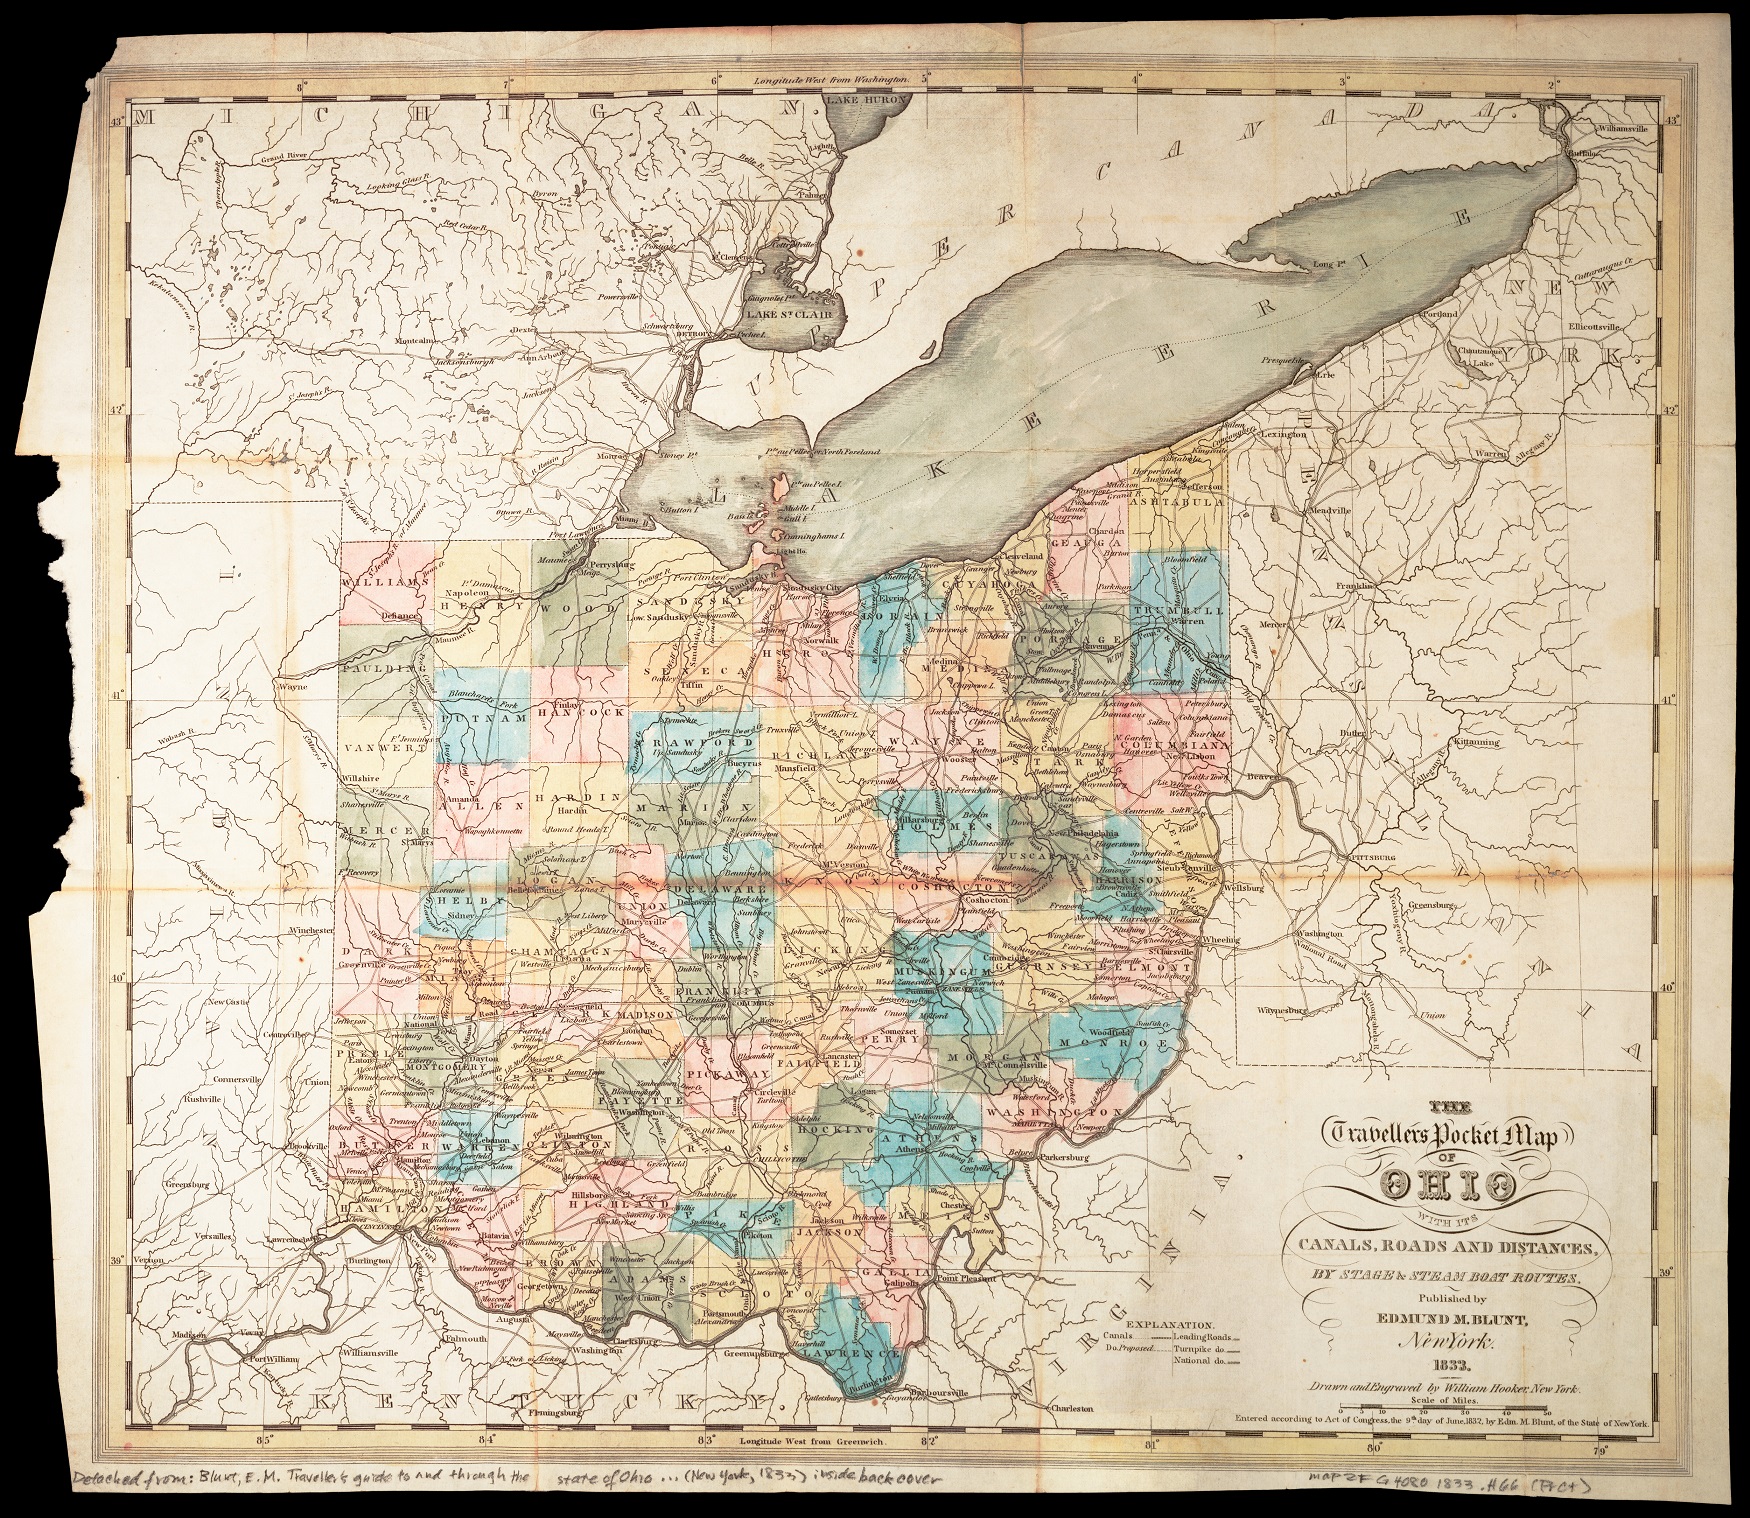 Map of Ohio with sections of surrounding states and Lake Eire, Ohio is broken into different colored counties. Roads, railroads, canals, and cities are marked.